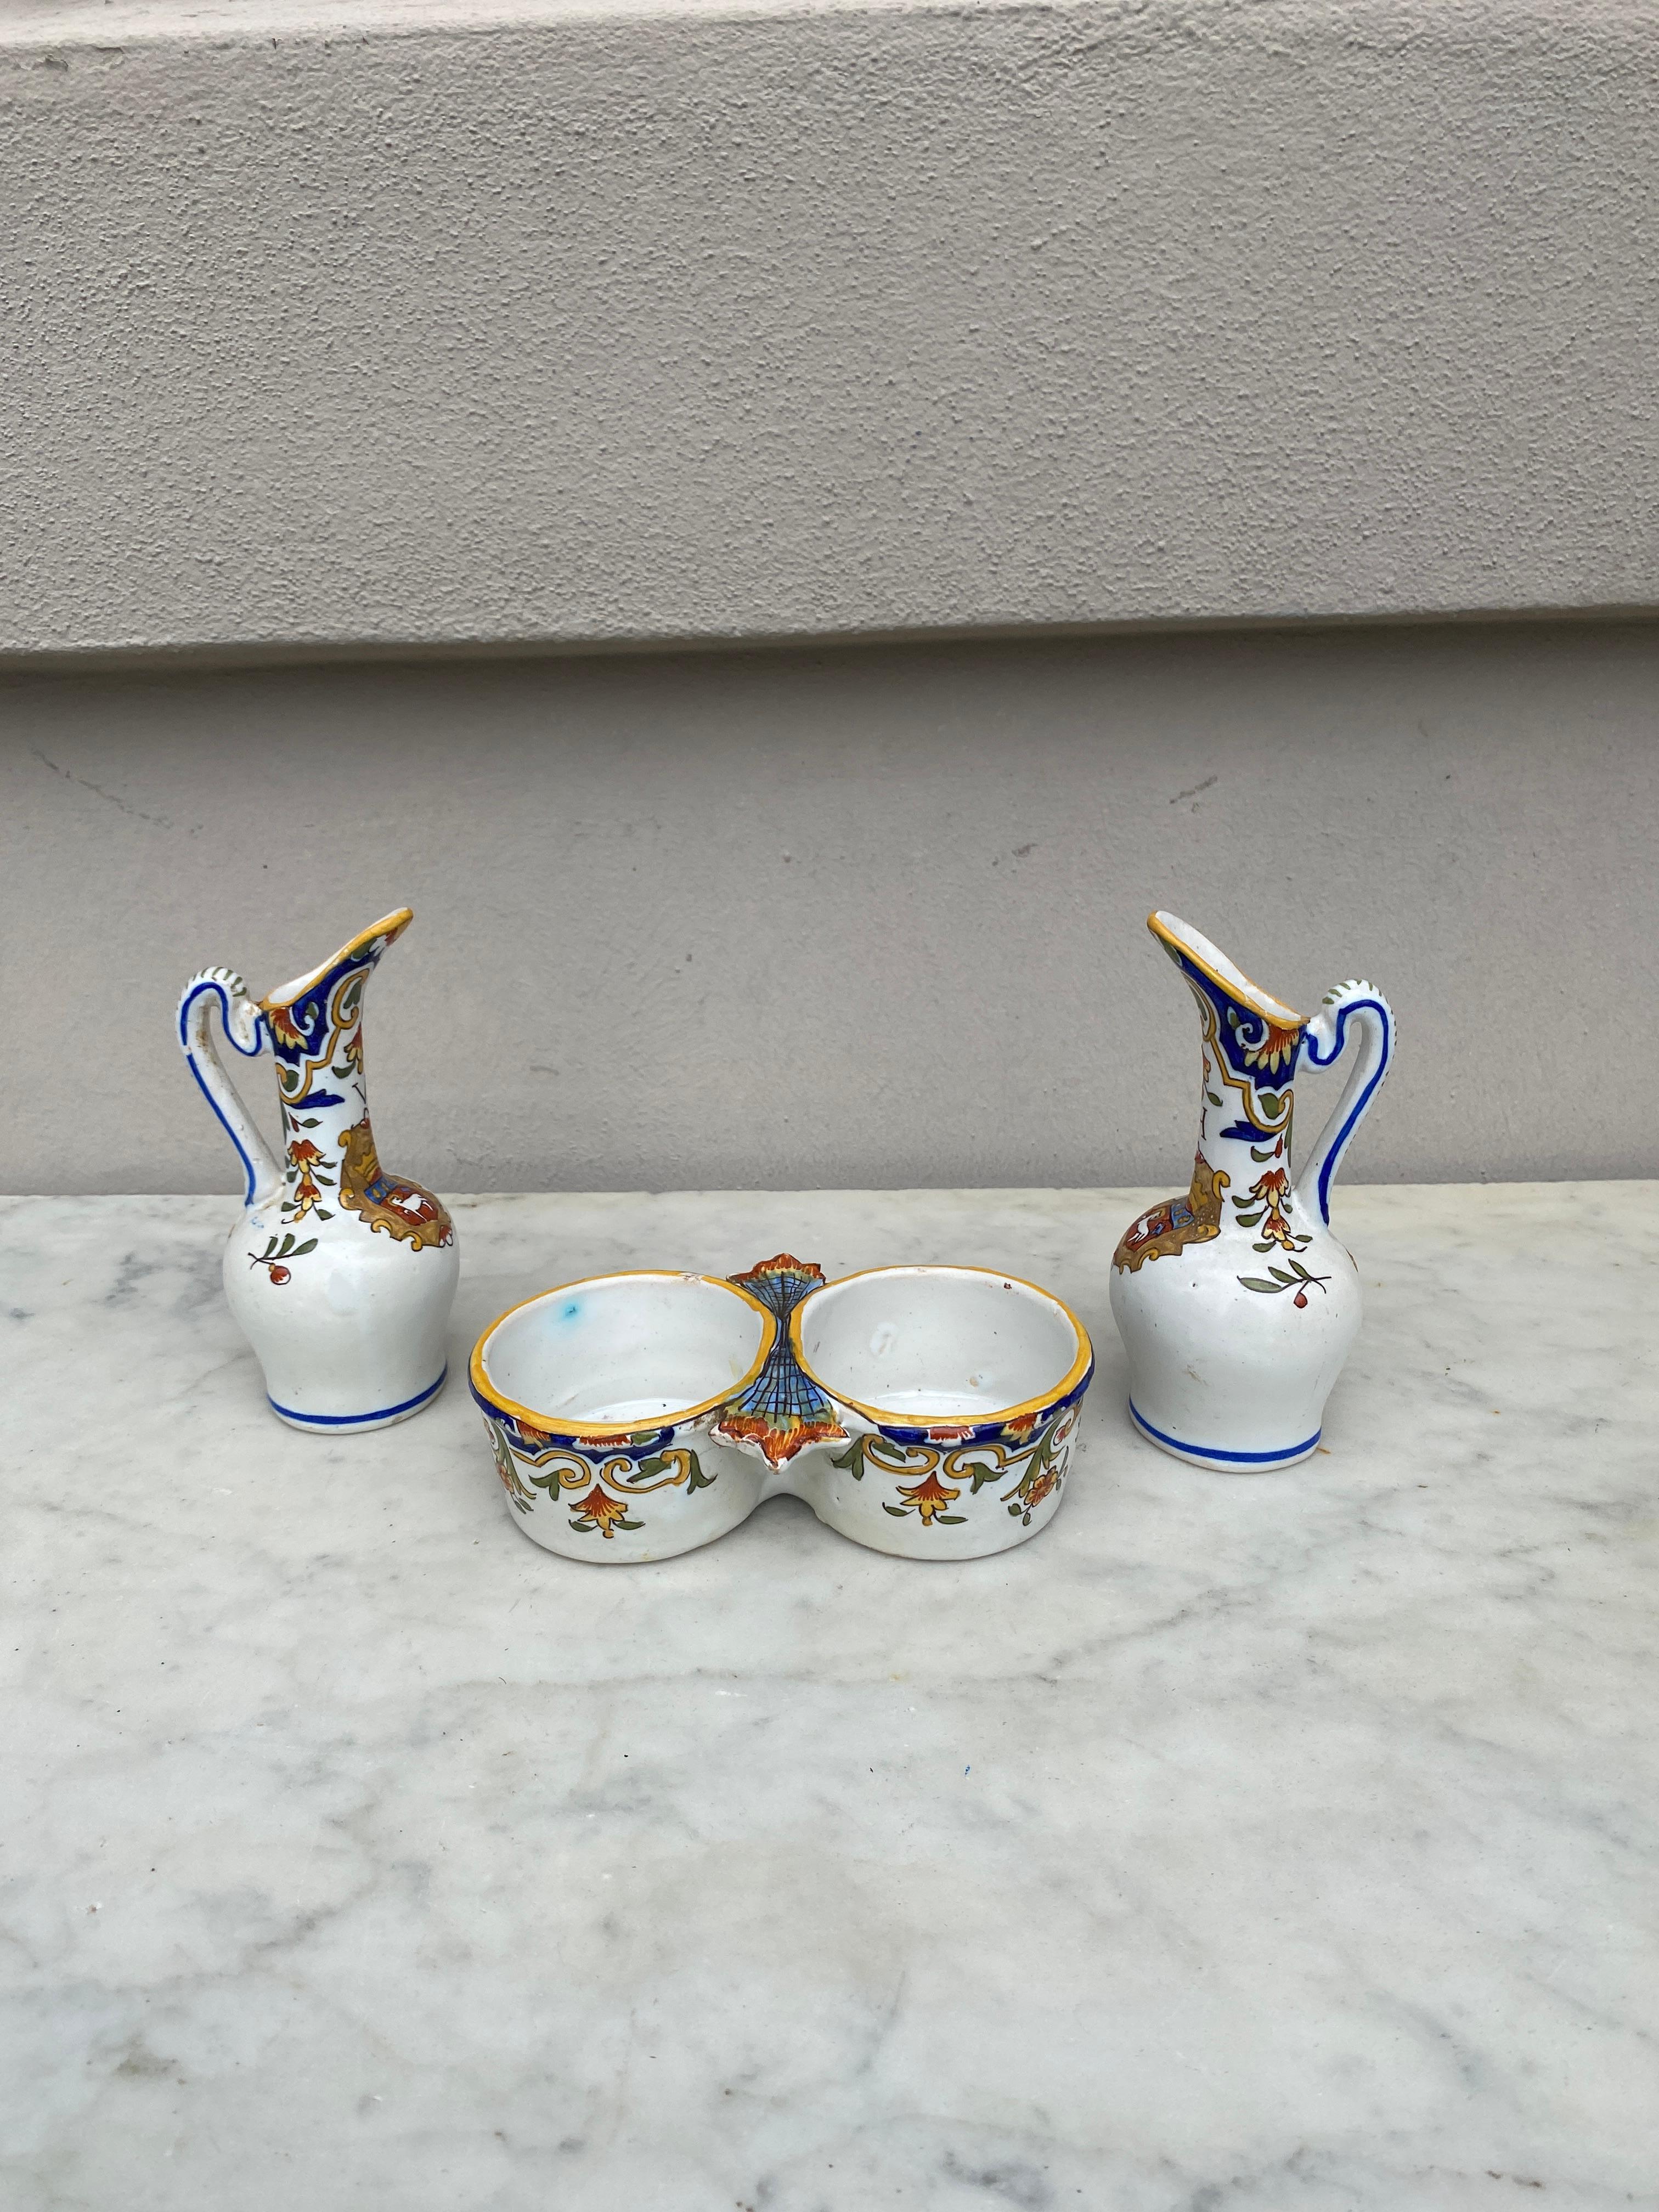 Rustic Set of French Faience Oil & Vinegar Pitcher & Holder Desvres For Sale